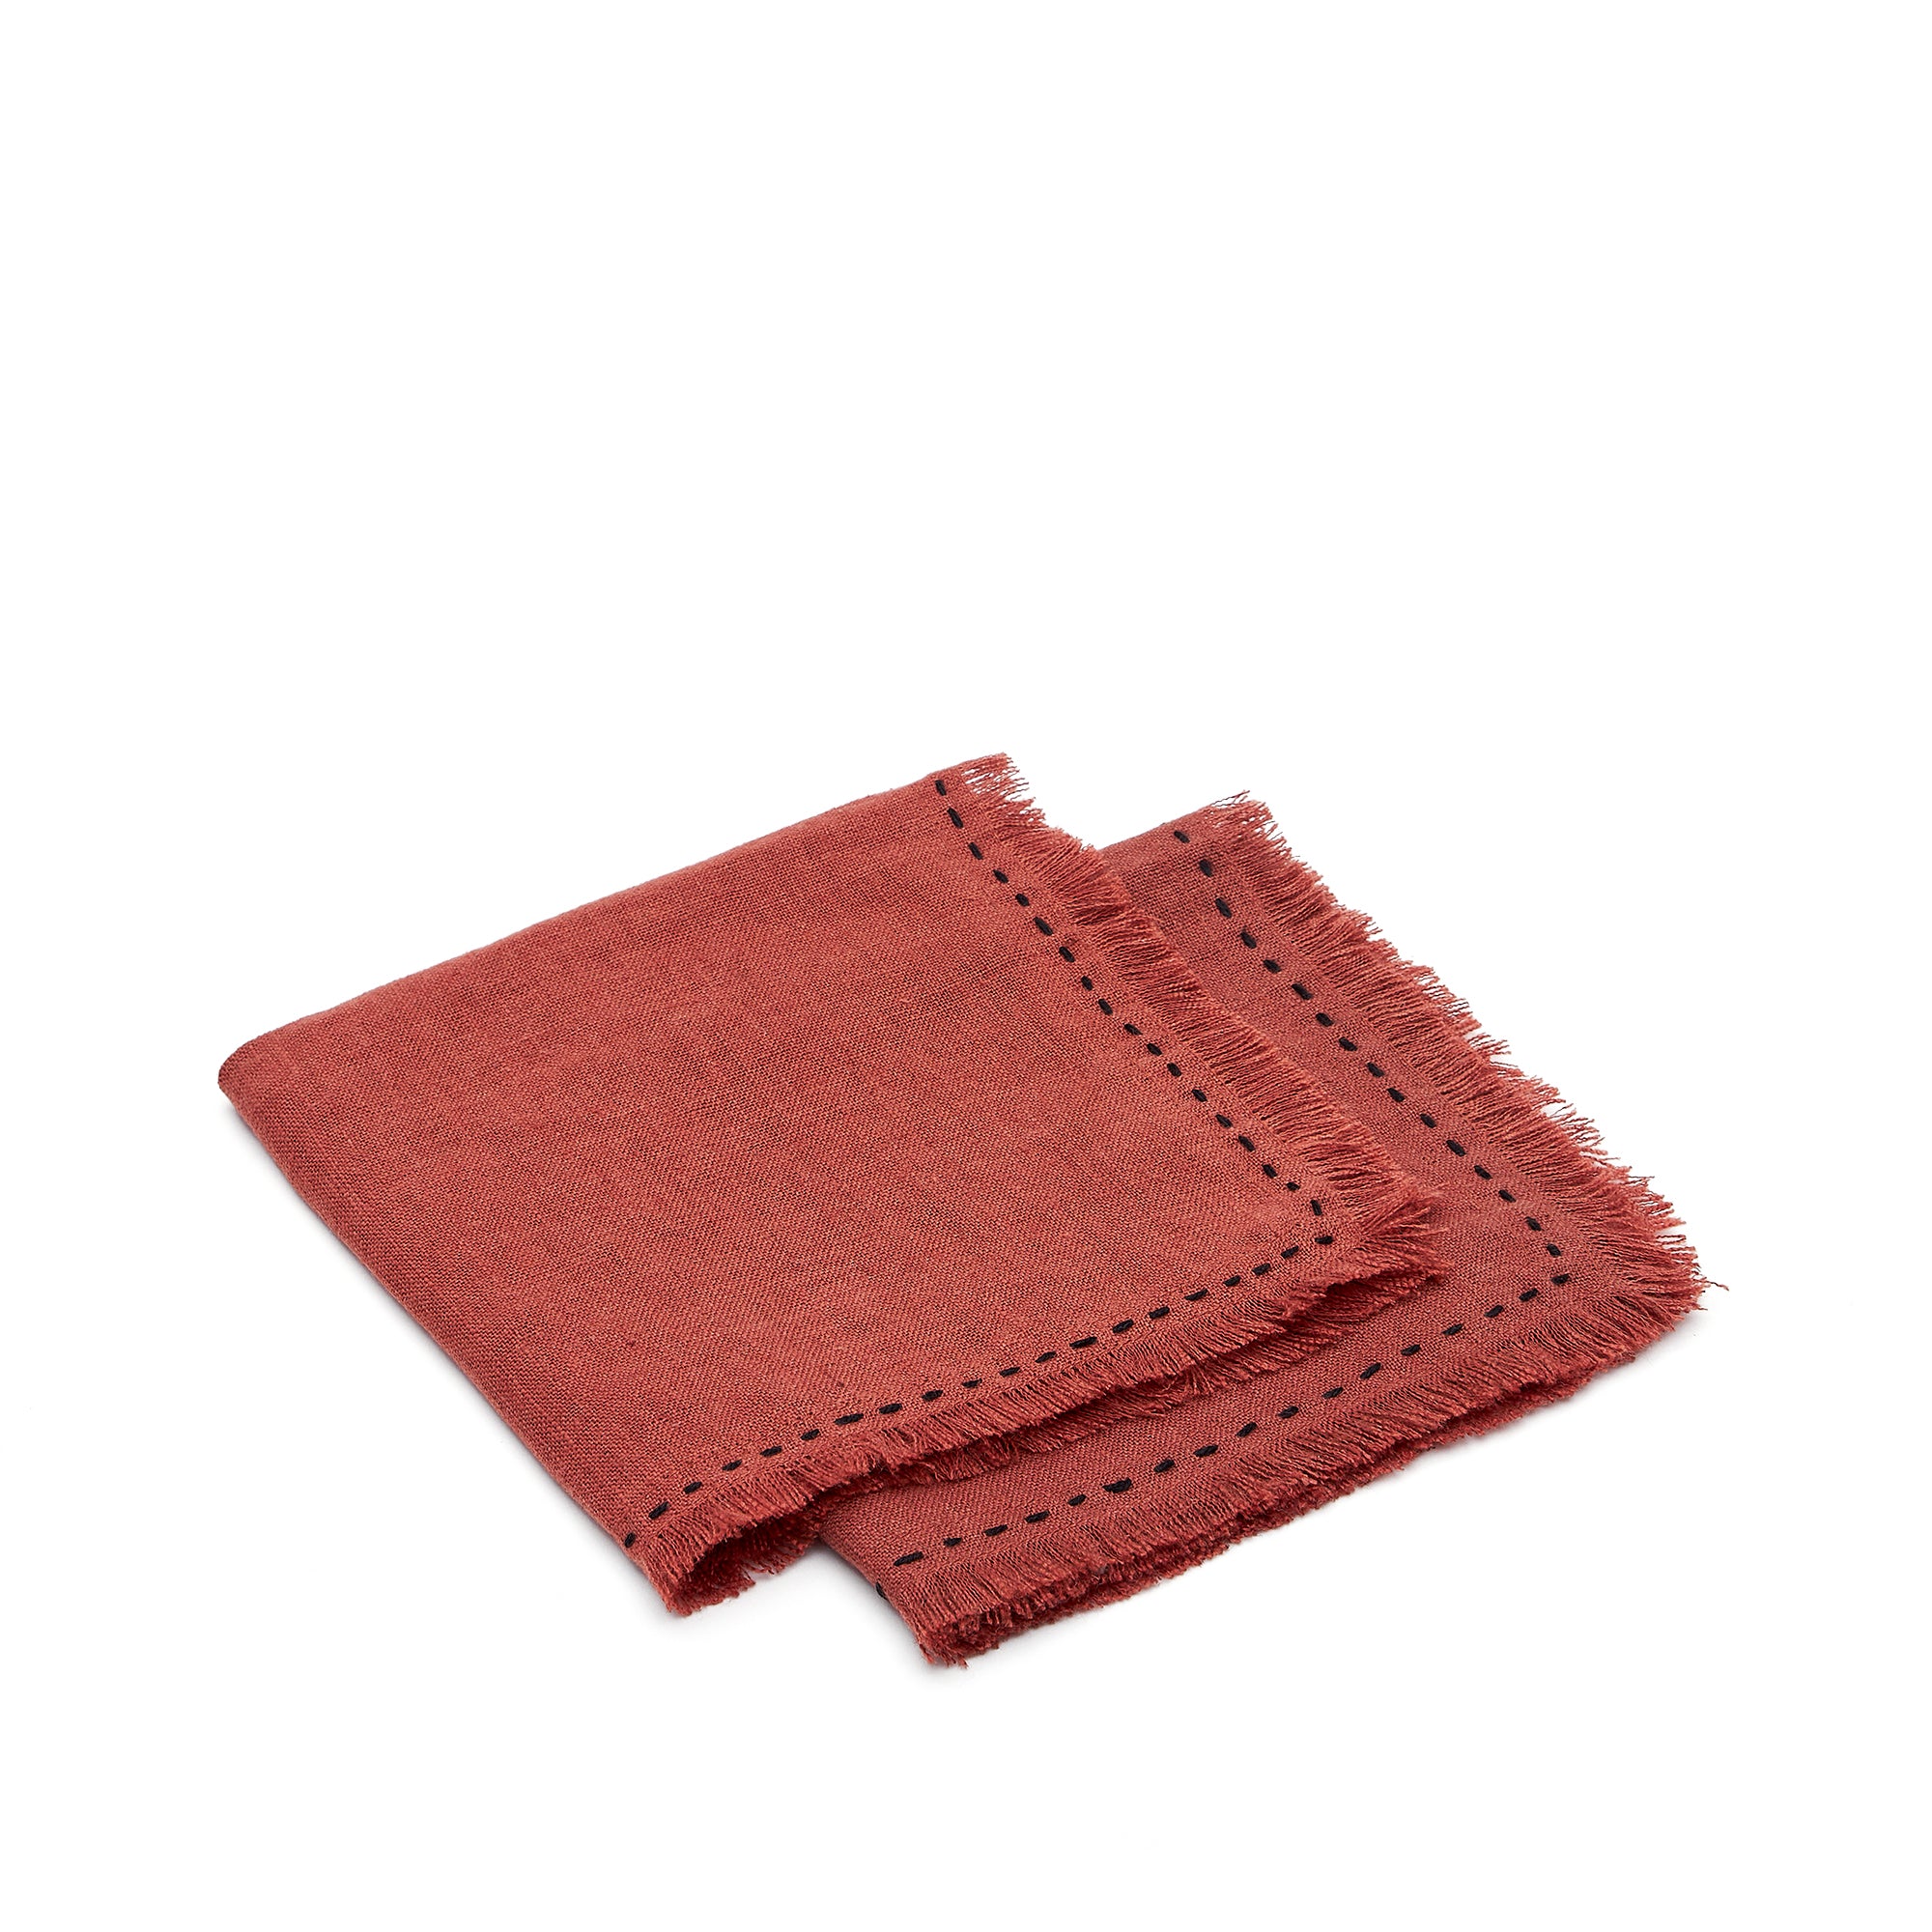 Montalt set of two 100% linen napkins with terracotta fringes and black contrast stitching